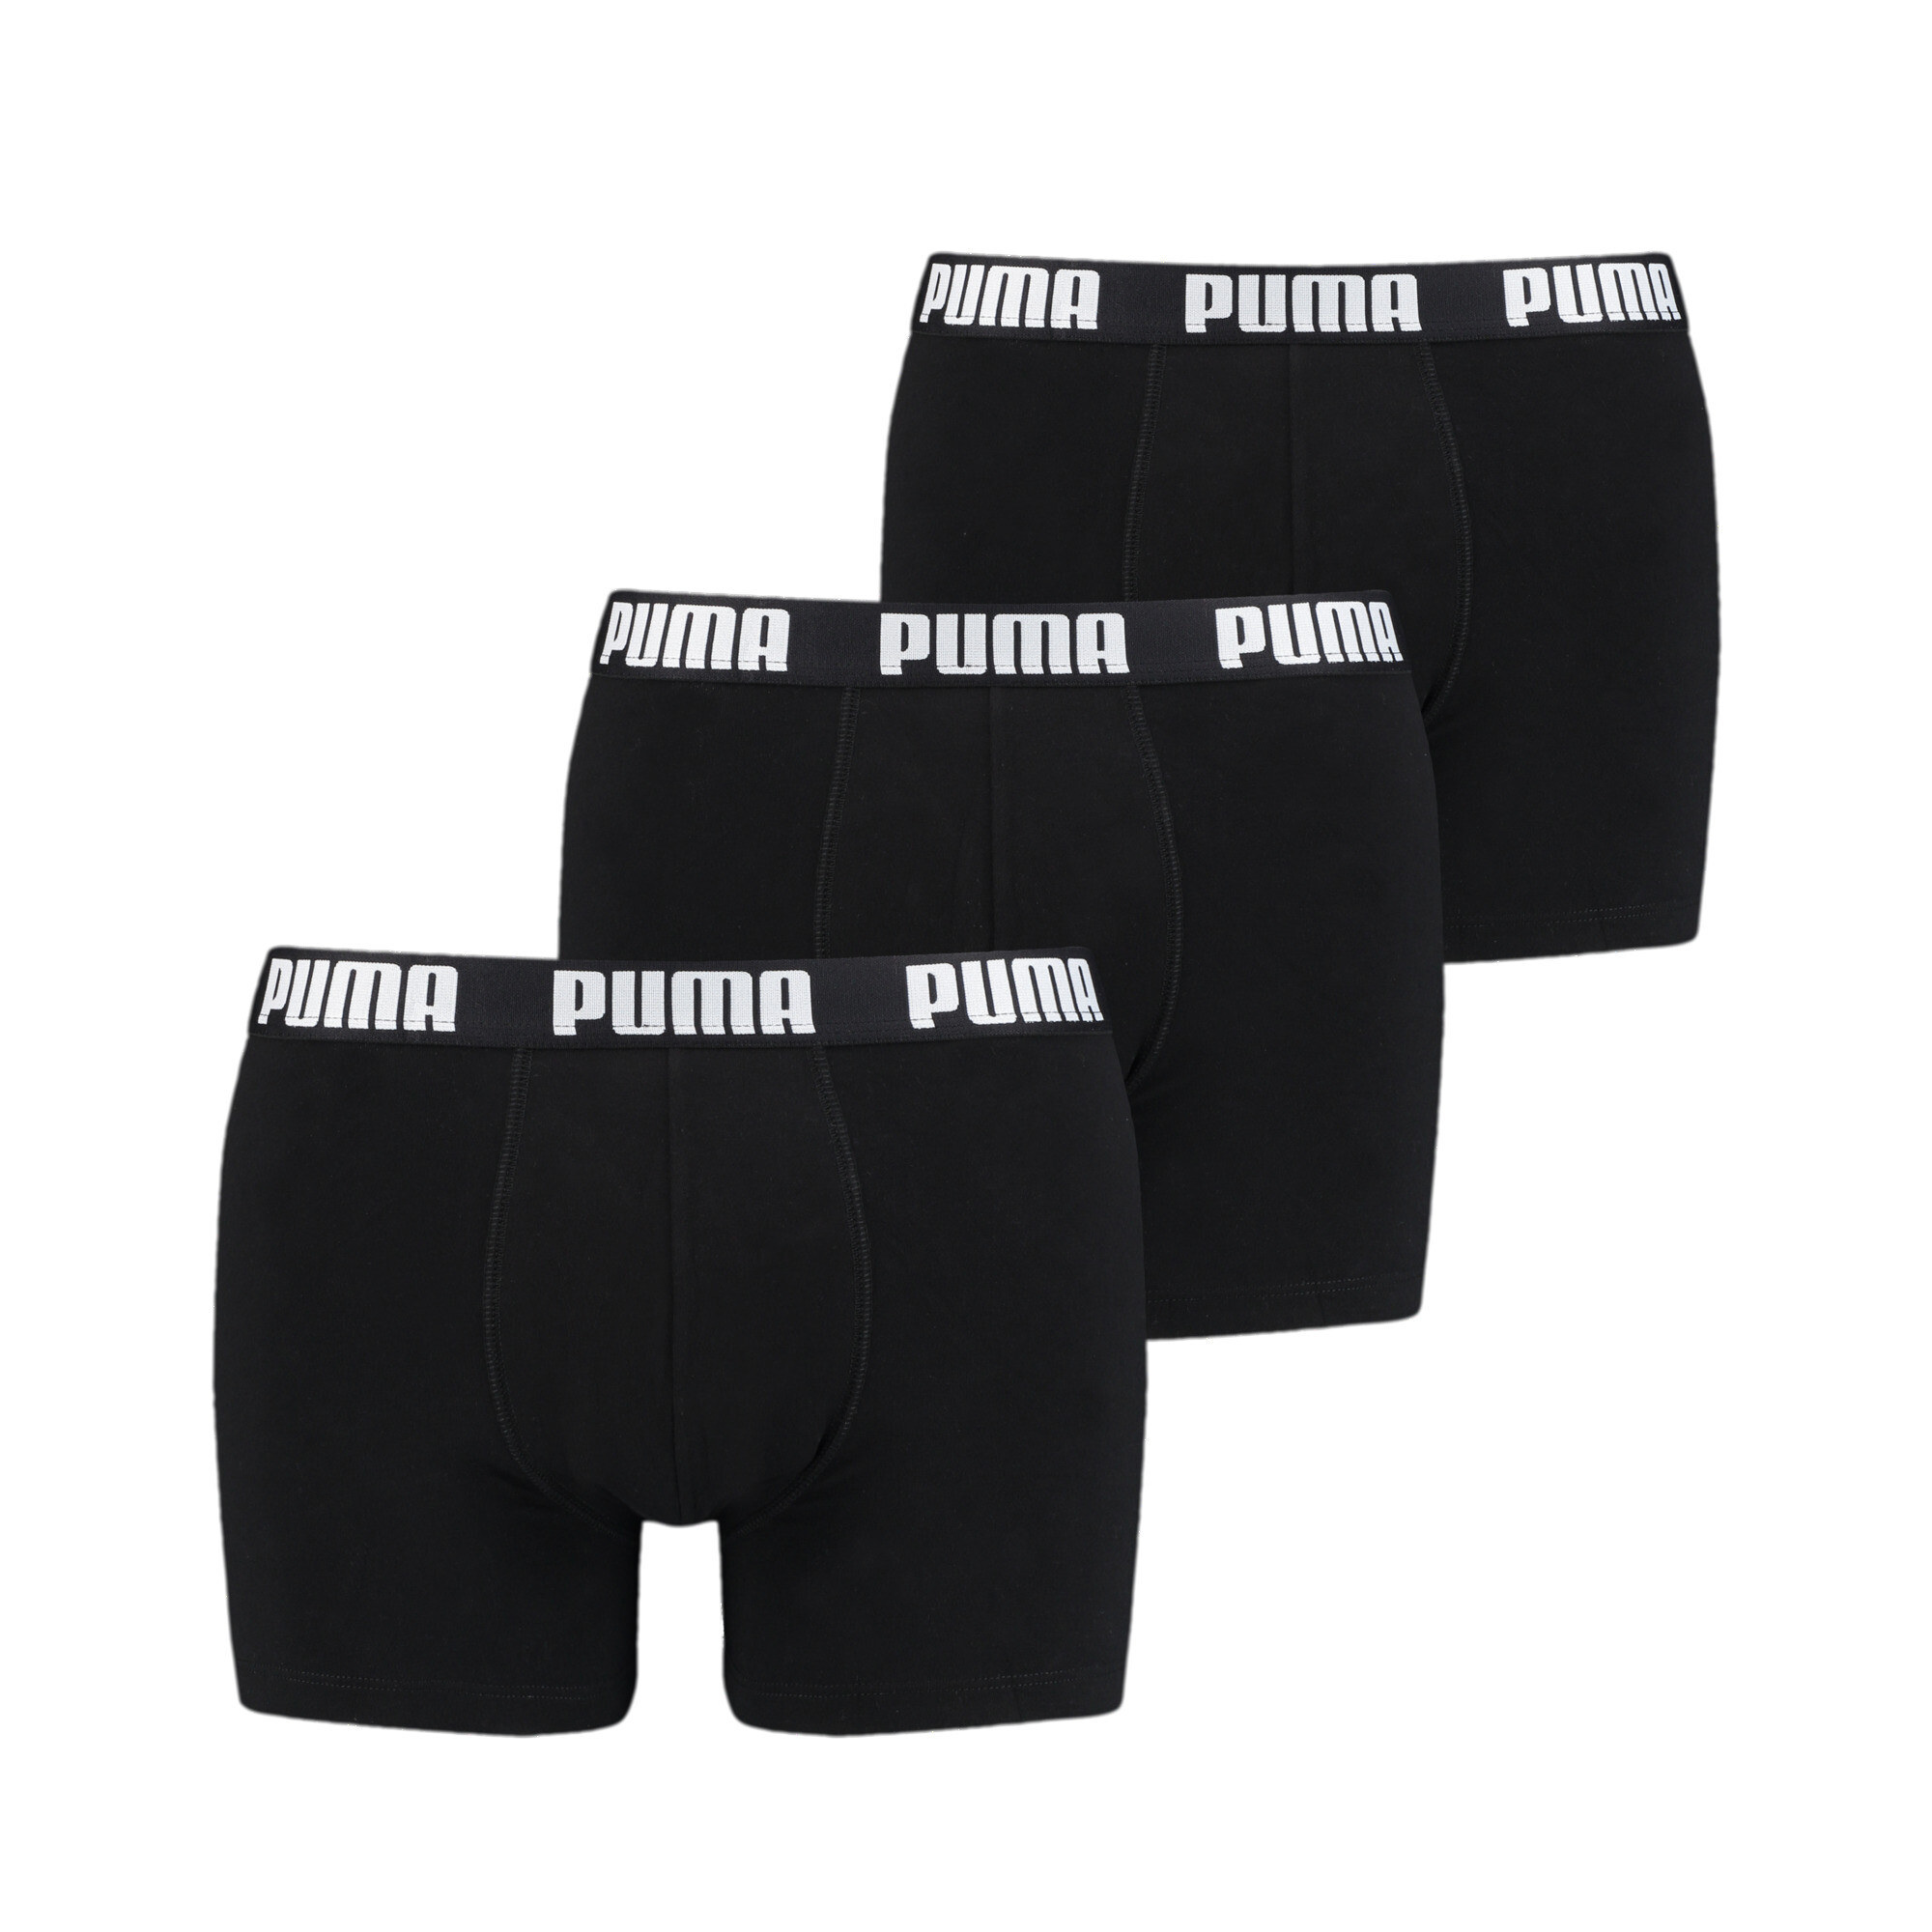 Men's PUMA Everyday Boxers 3 Pack In Black, Size Small